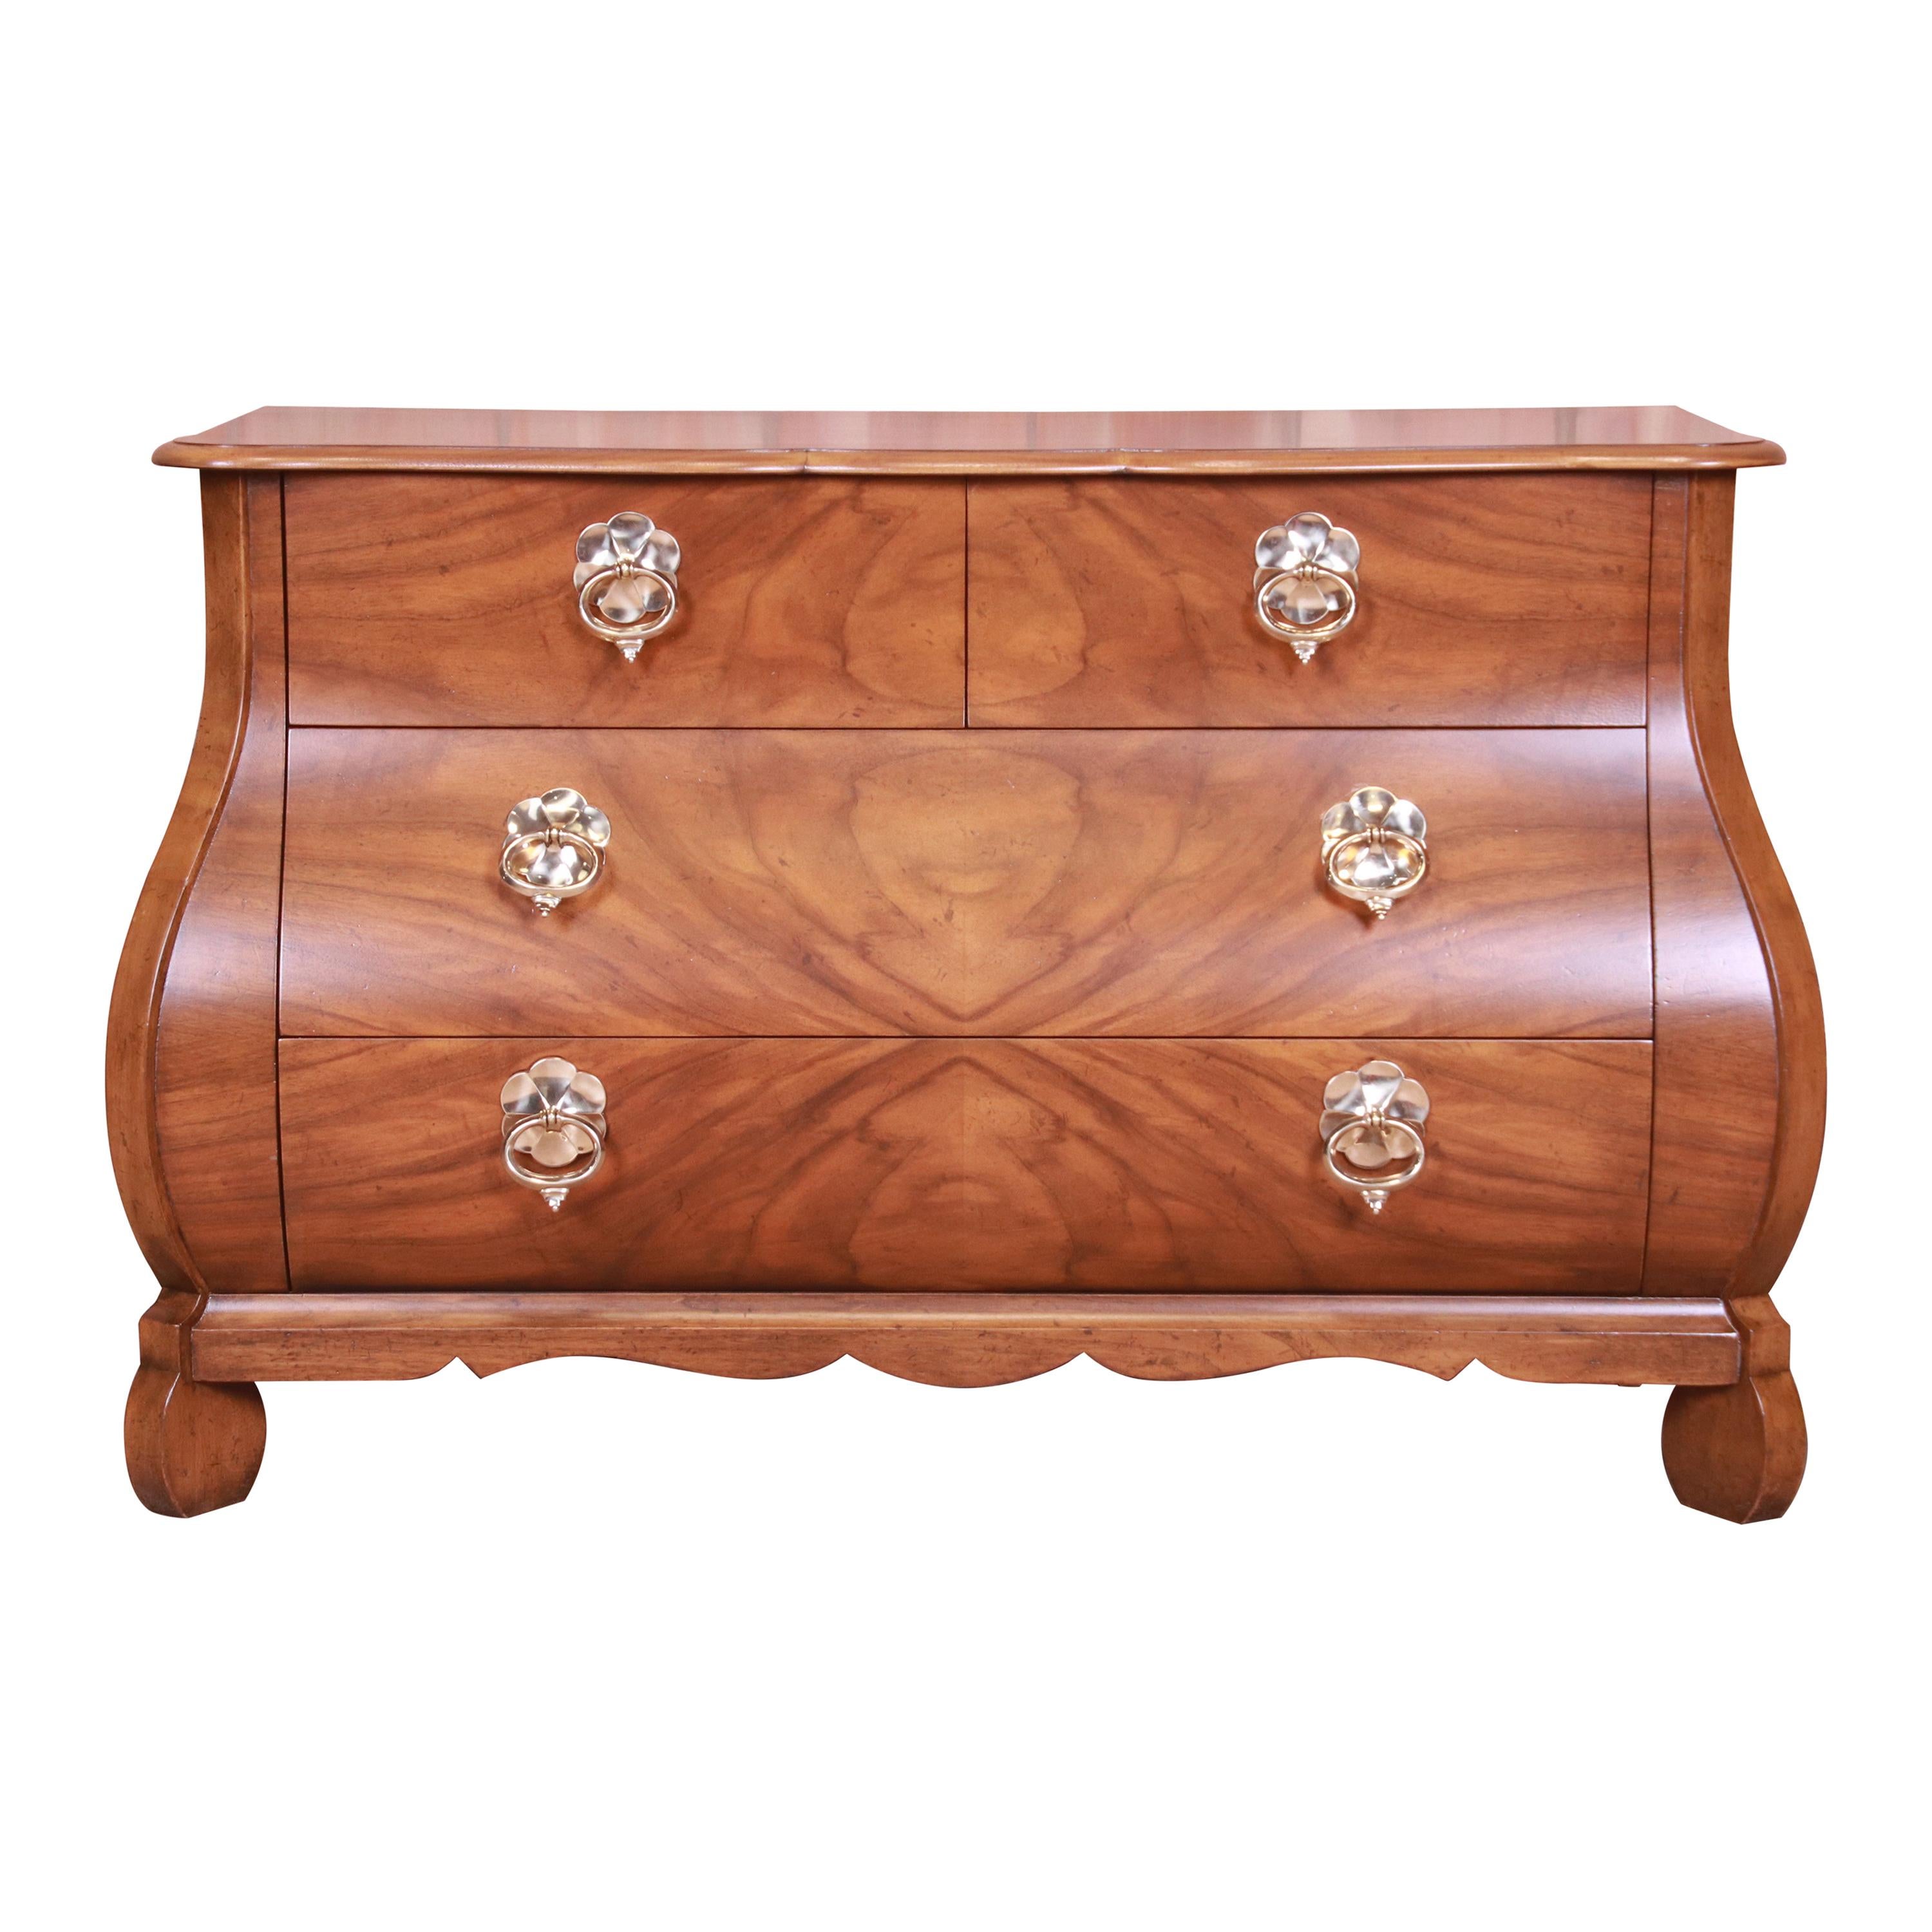 Baker Furniture French Provincial Louis XV Burled Walnut Bombay Chest or Commode